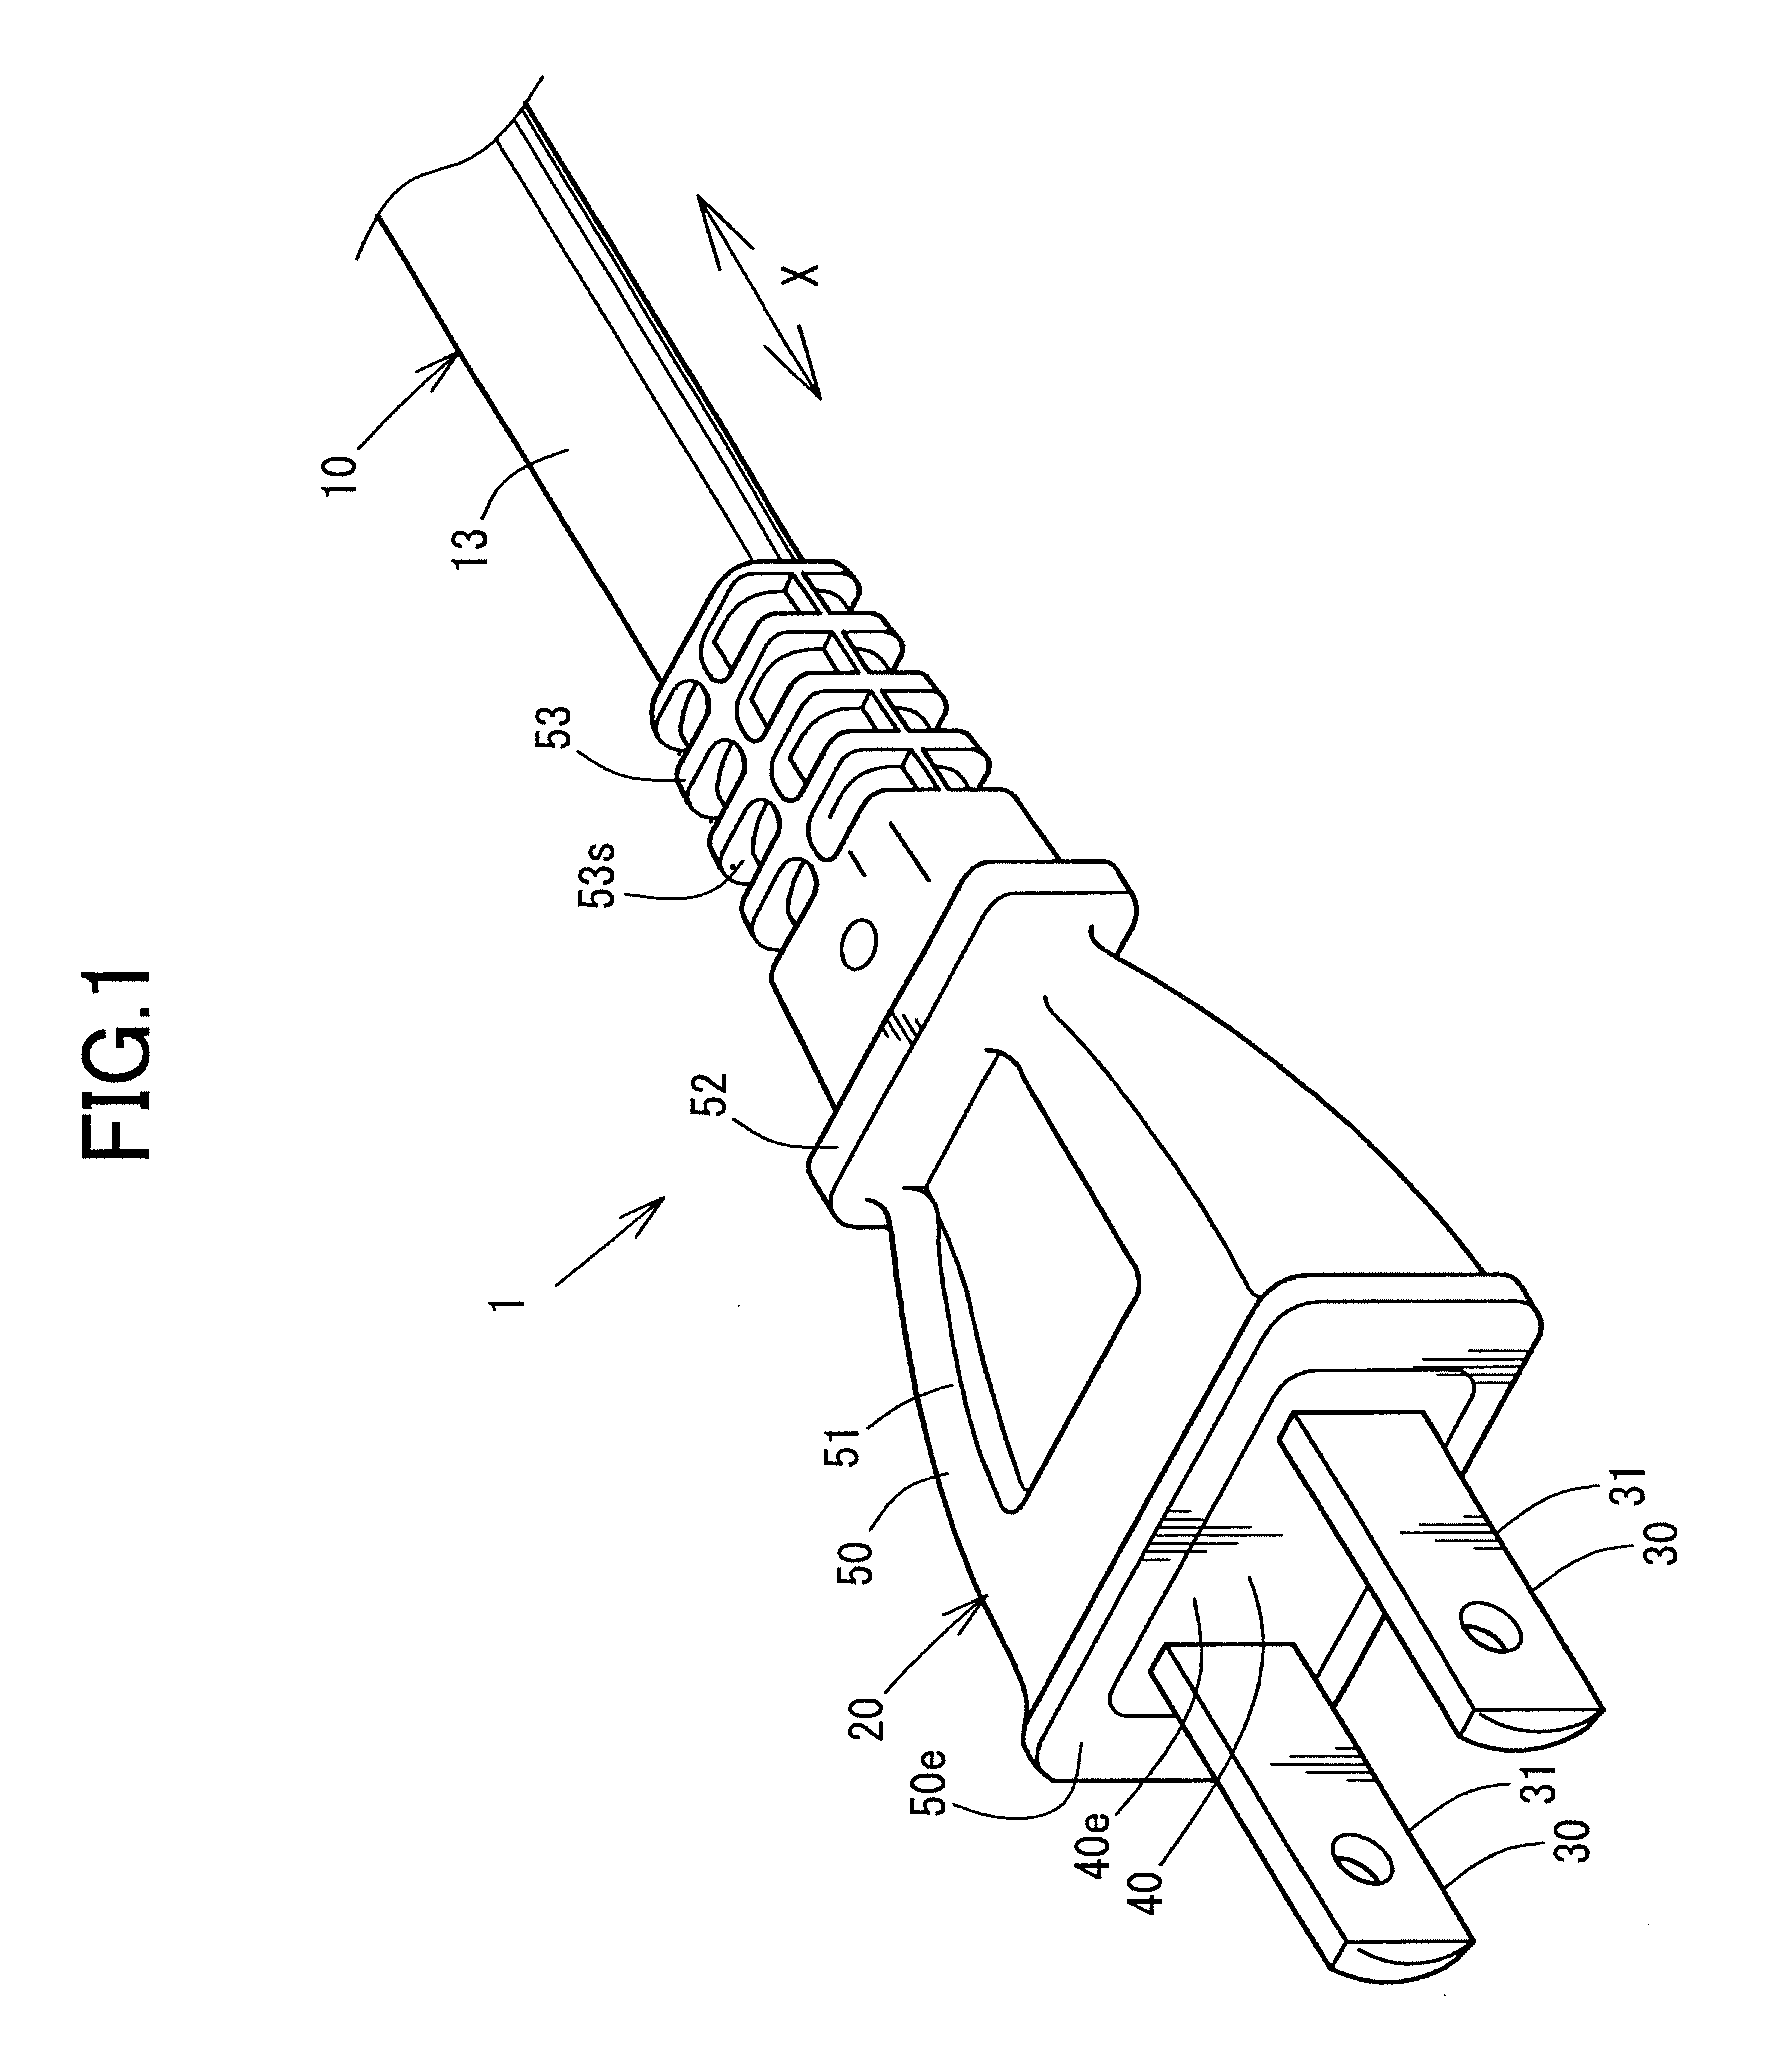 Electrical plug-provided cord